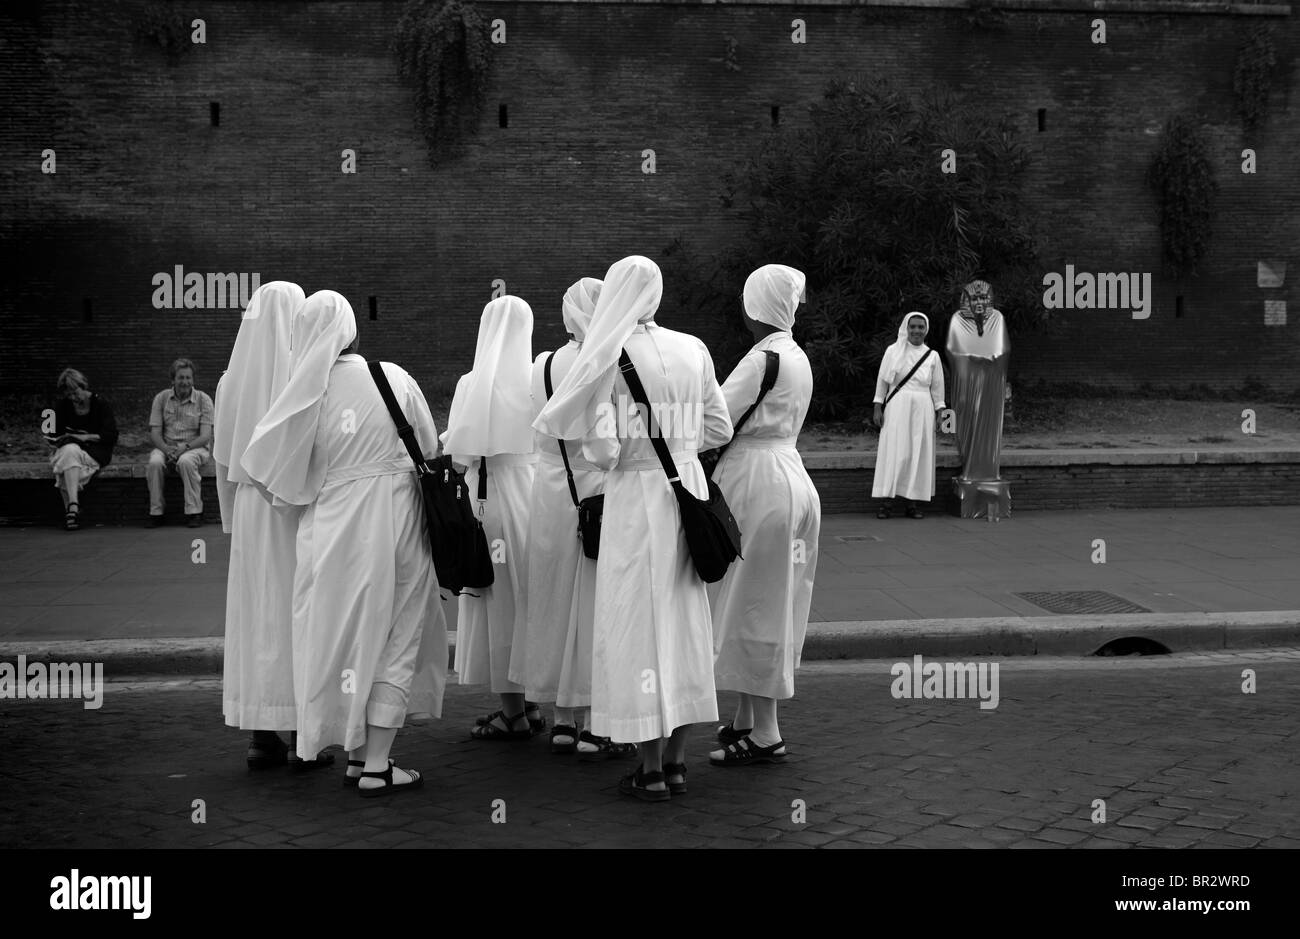 Group of nuns watching friend in street by mime artist Stock Photo